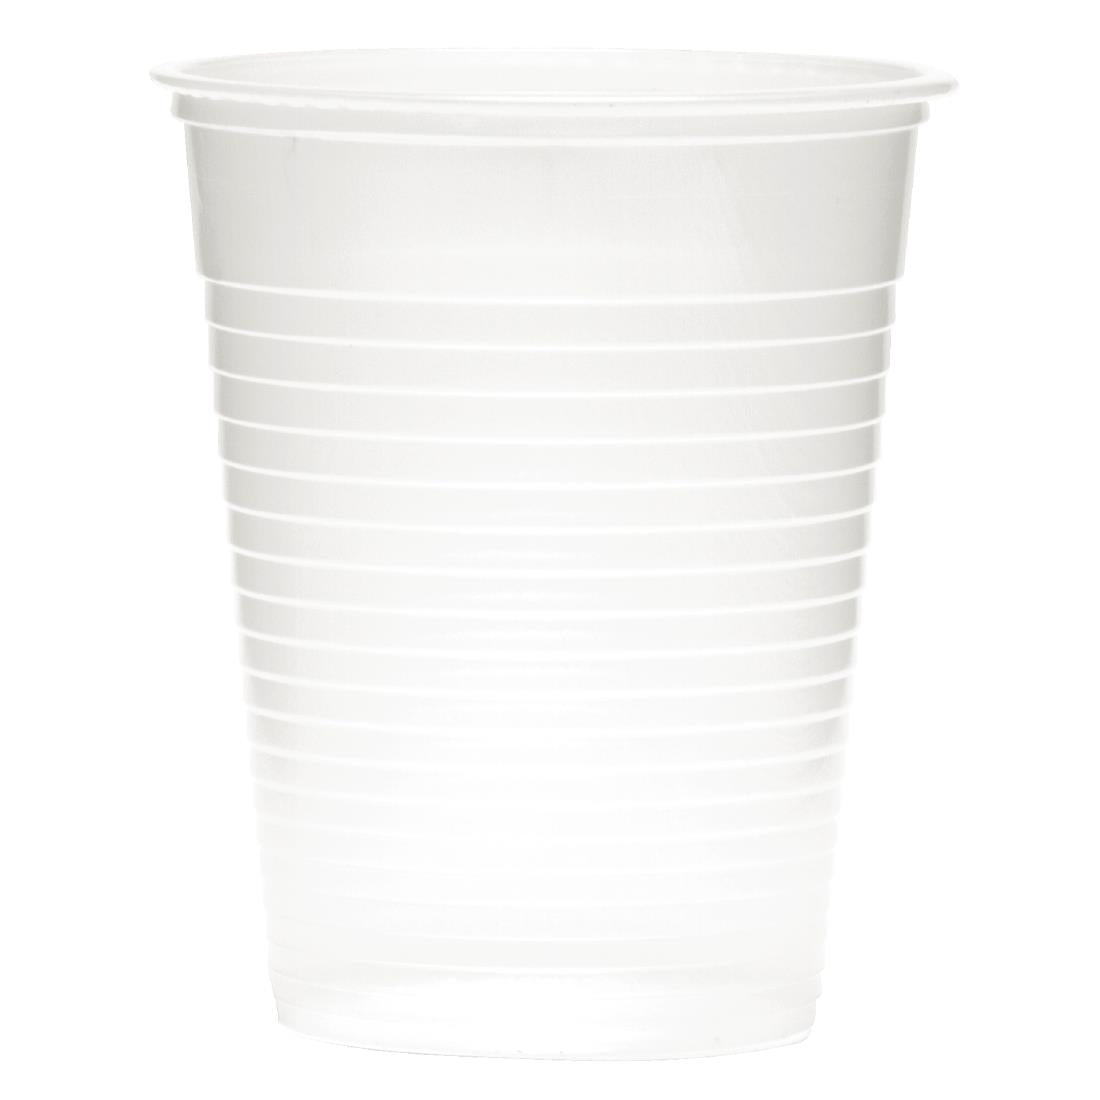 Water Cooler Cups Translucent 200ml / 7oz (Pack of 2000)